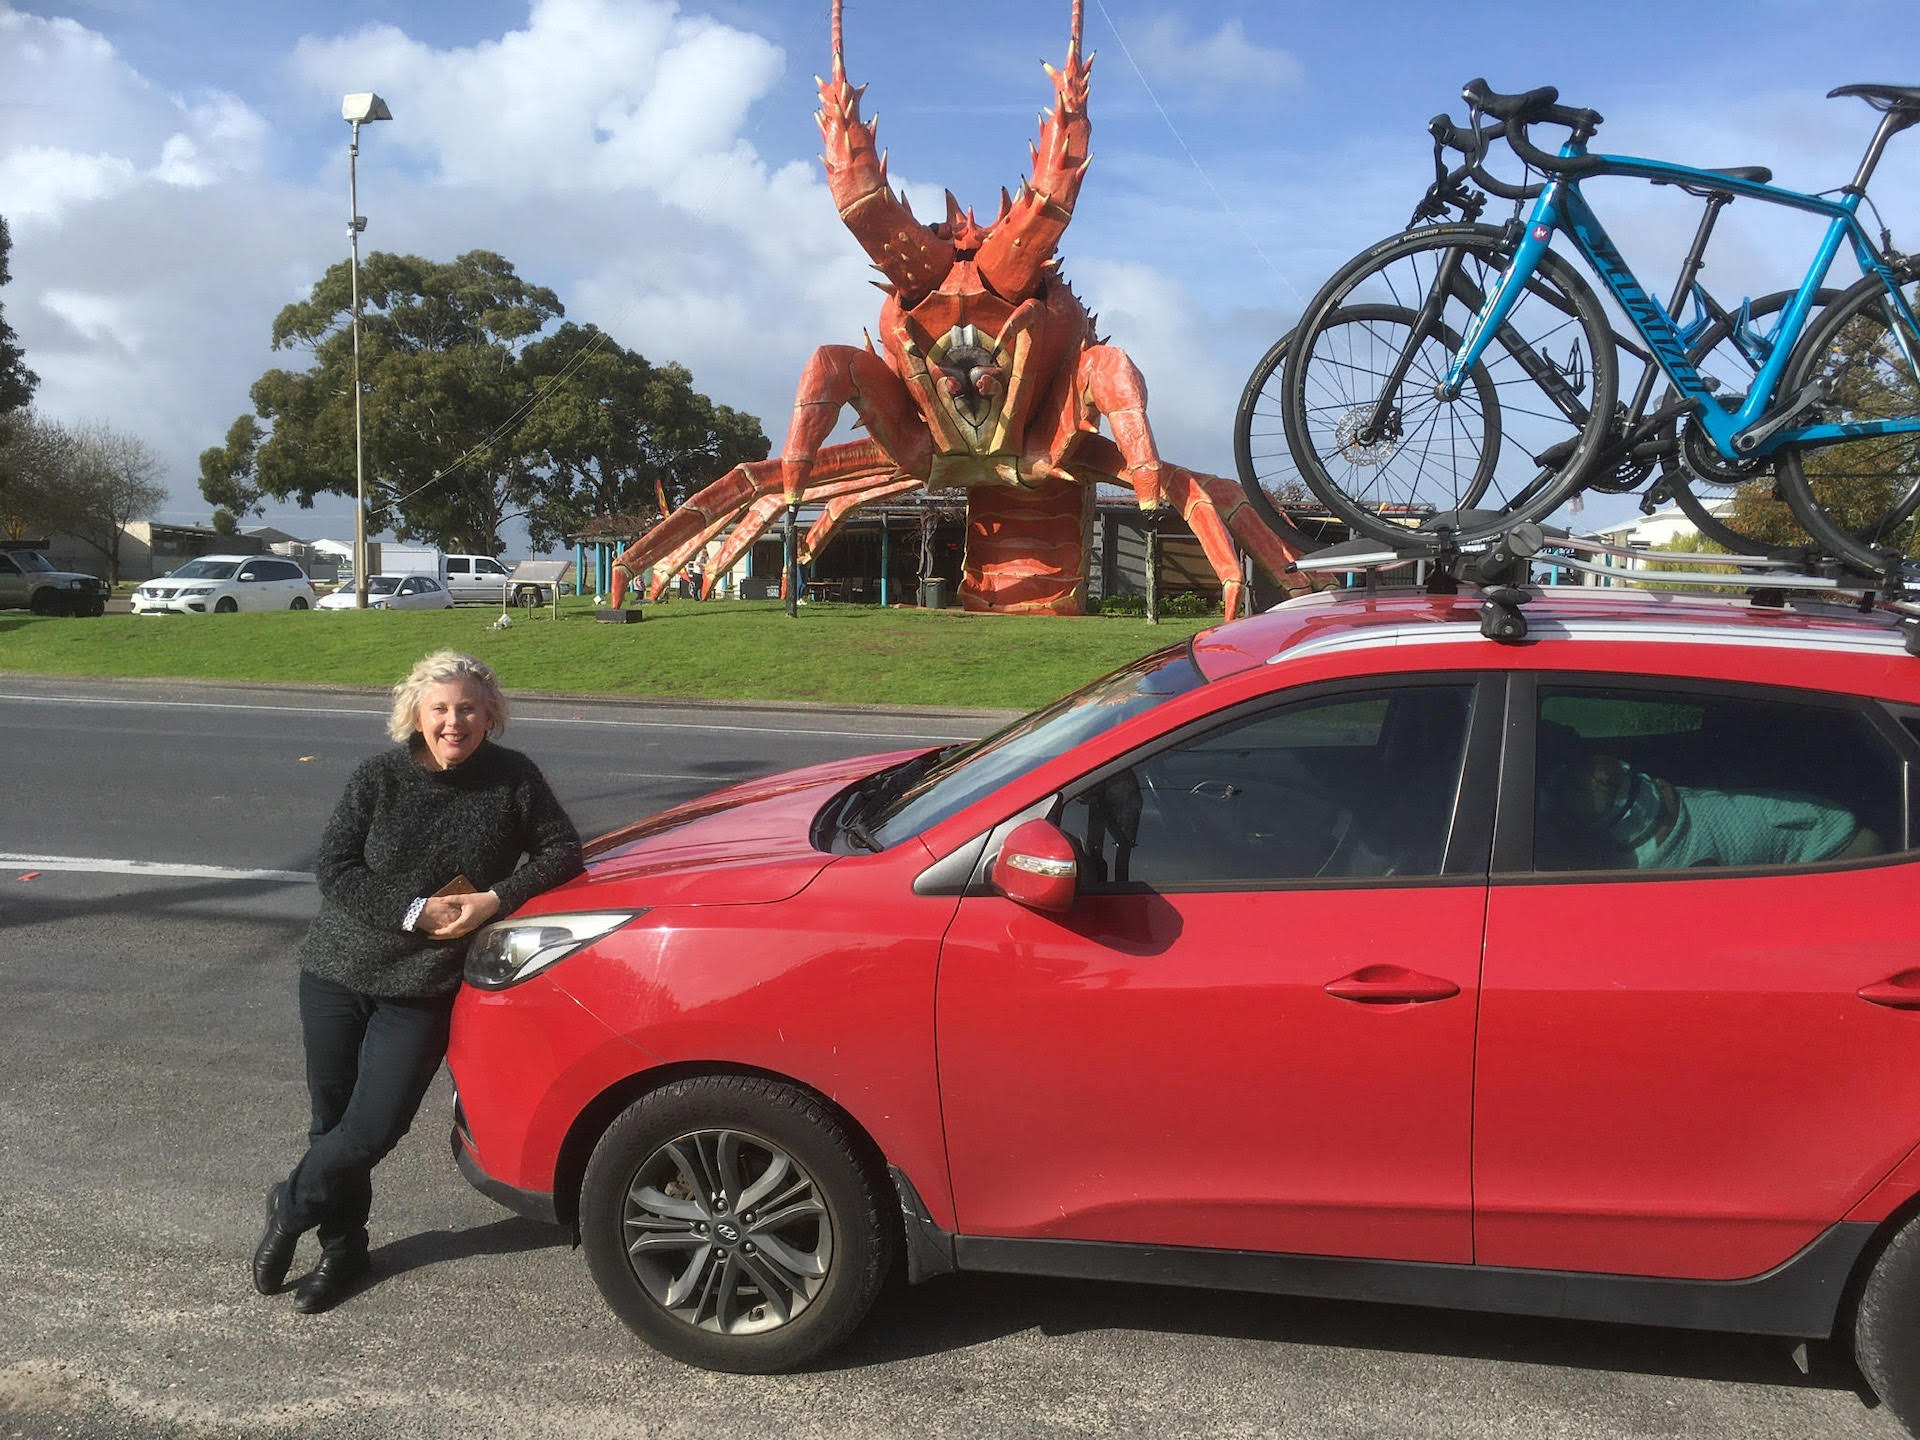 A woman leans against a car which has two bikes mounted on the roof. In the background is the Big Lobster, a giant statue of a red lobster.